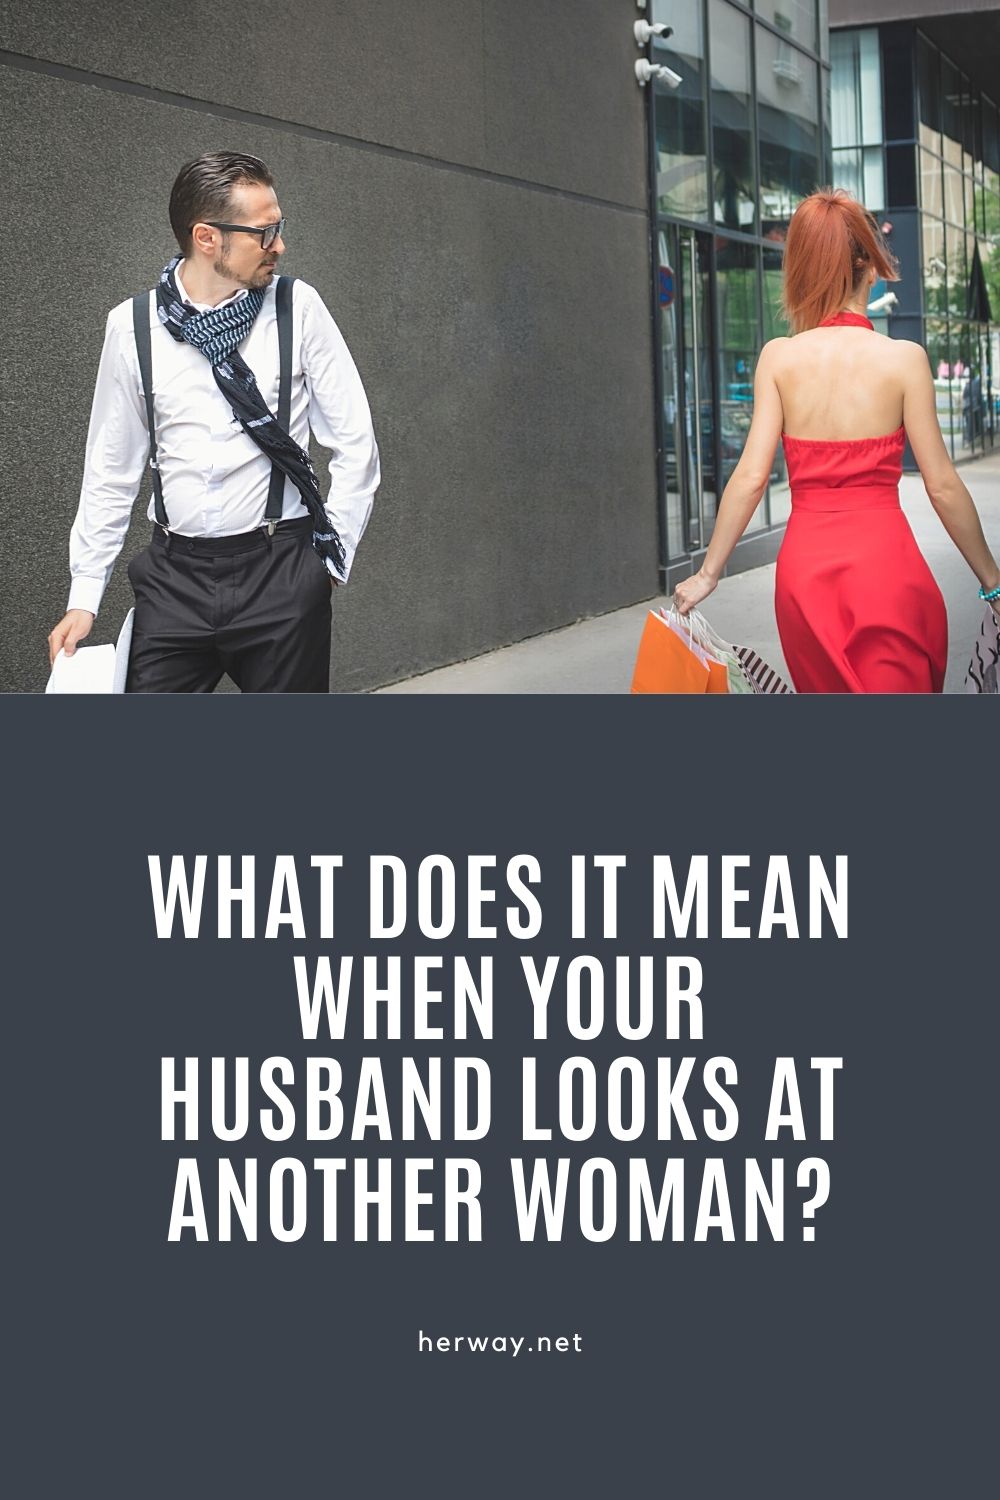 What Does It Mean When Your Husband Looks At Another Woman